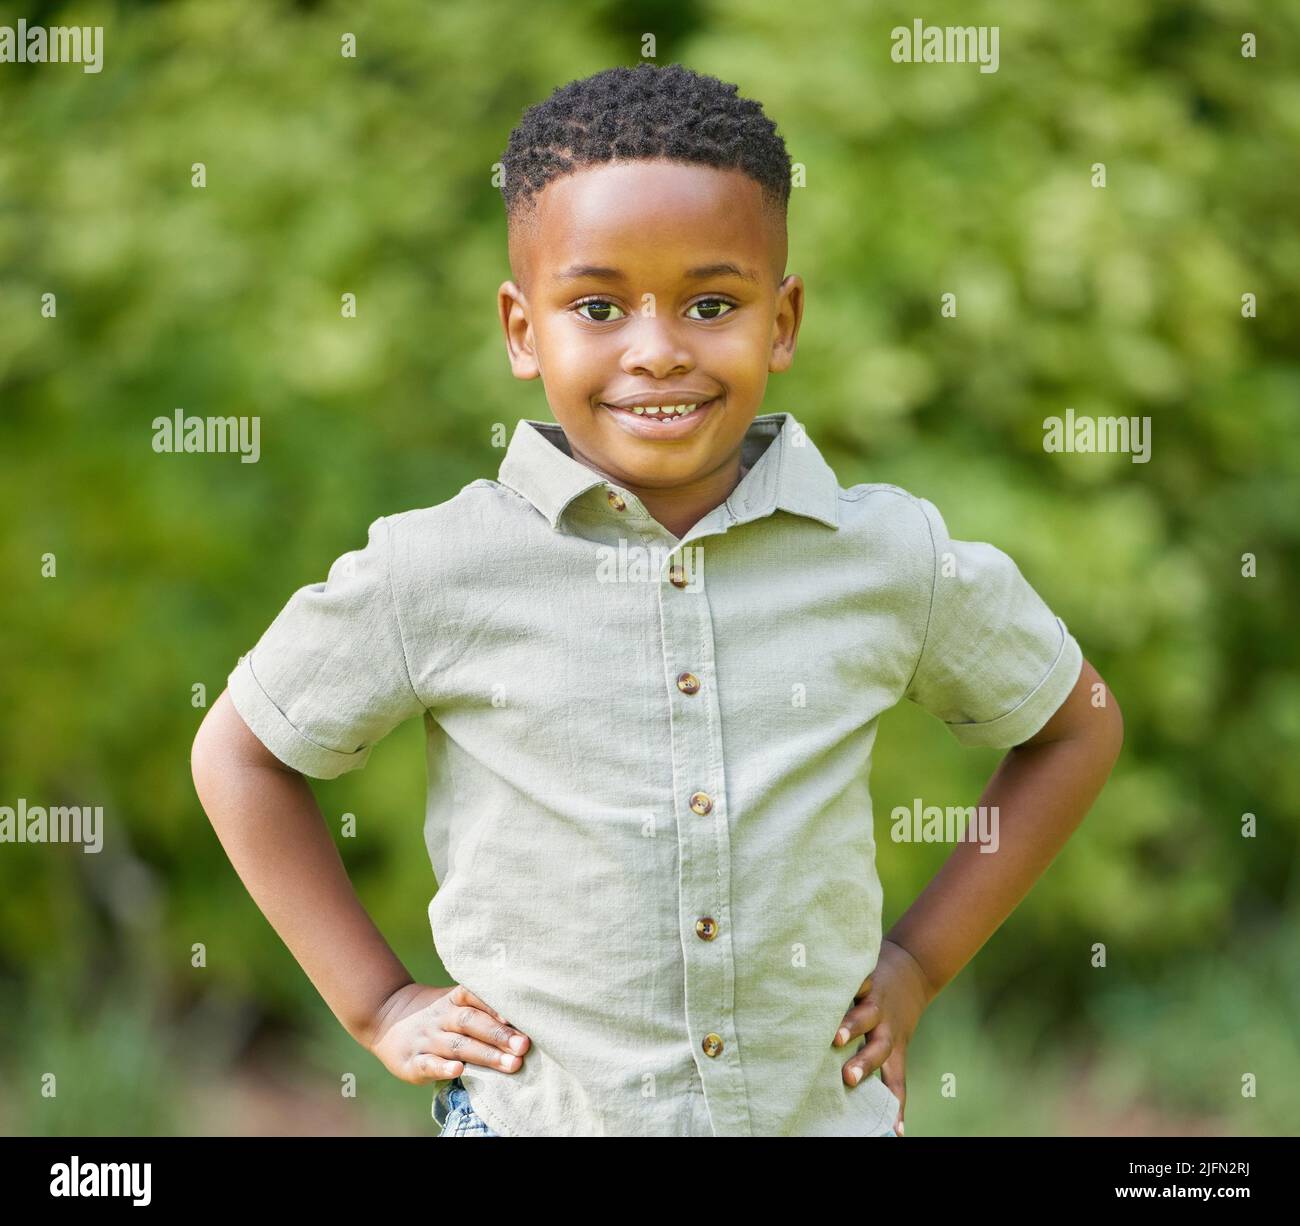 I love playing outside. Shot of an adorable little boy standing outside. Stock Photo